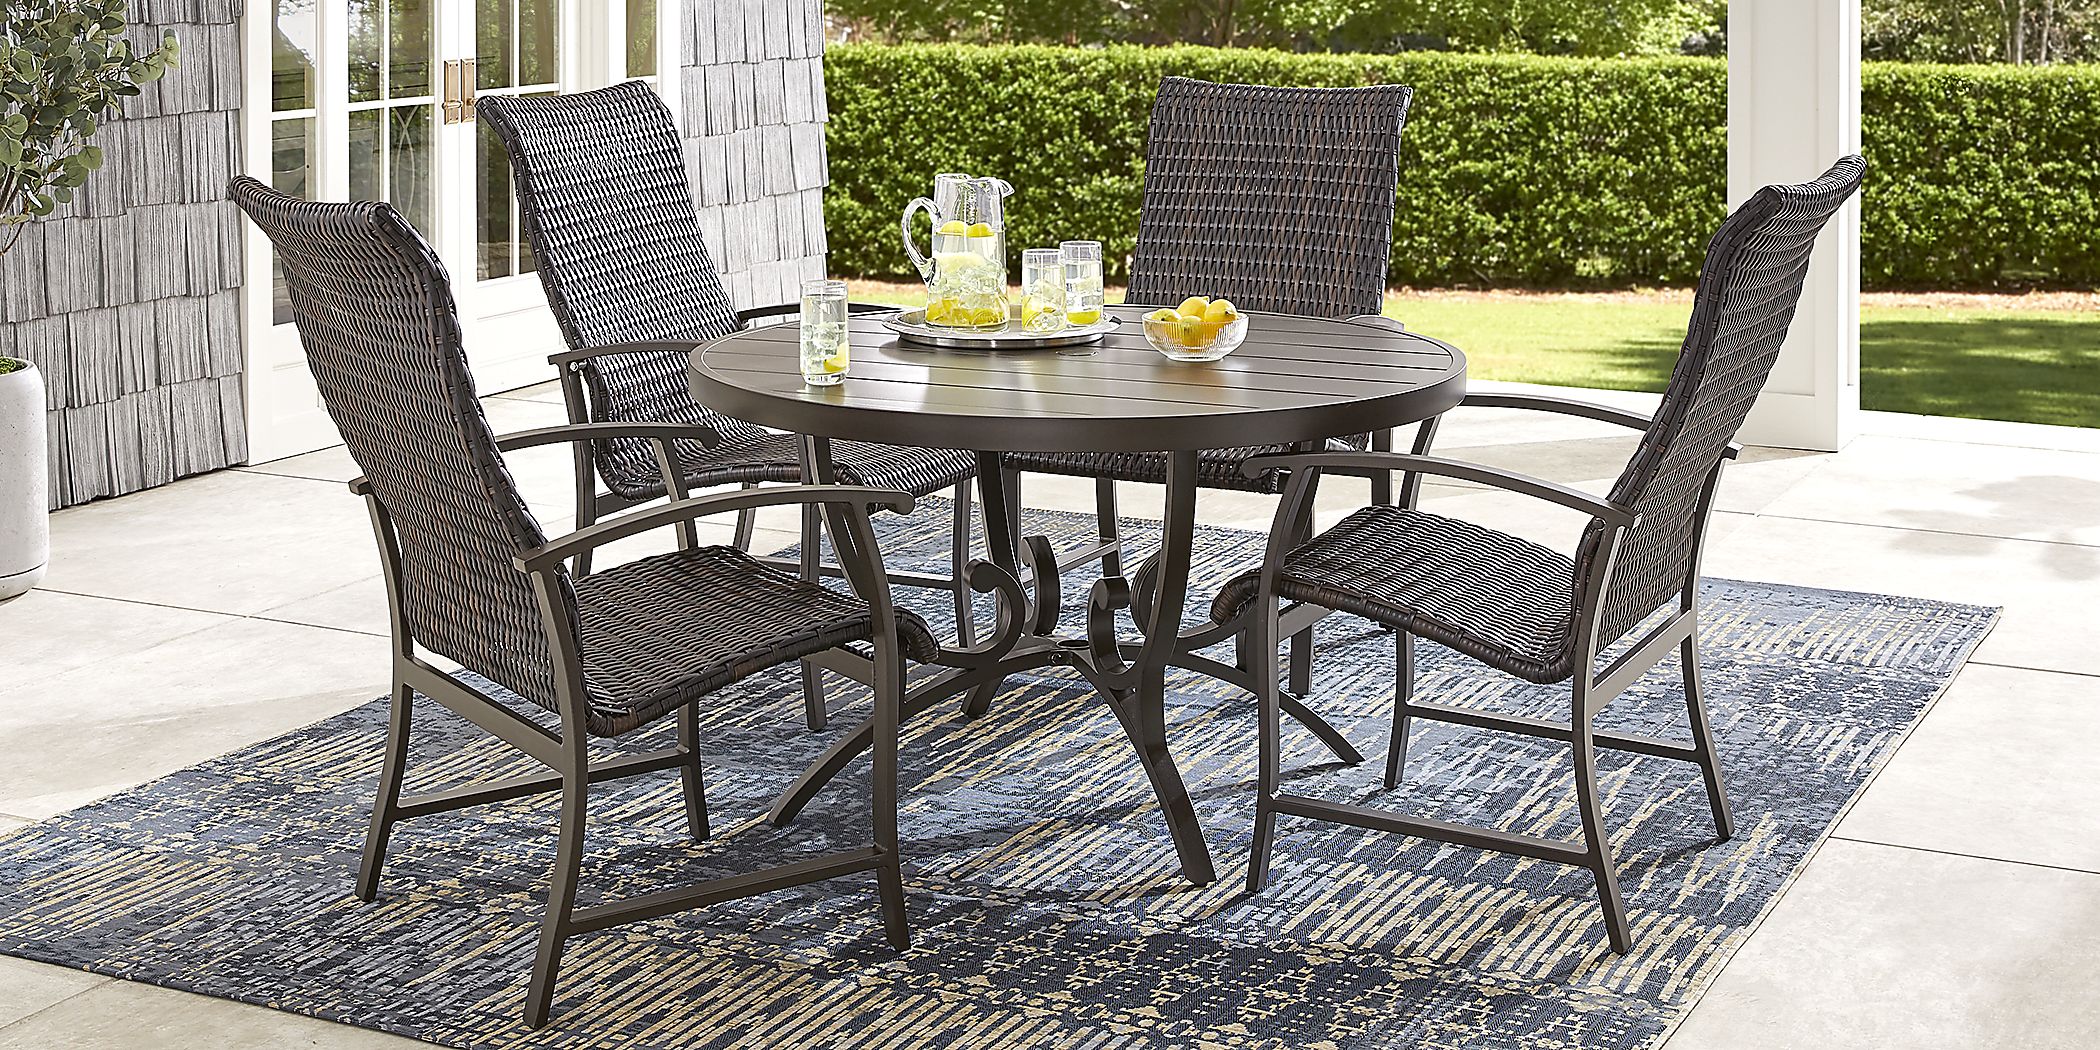 Gray with Gray Chairs Great Deal Furniture Baldry Outdoor 5 Piece Acacia Wood and Wicker Dining Set 